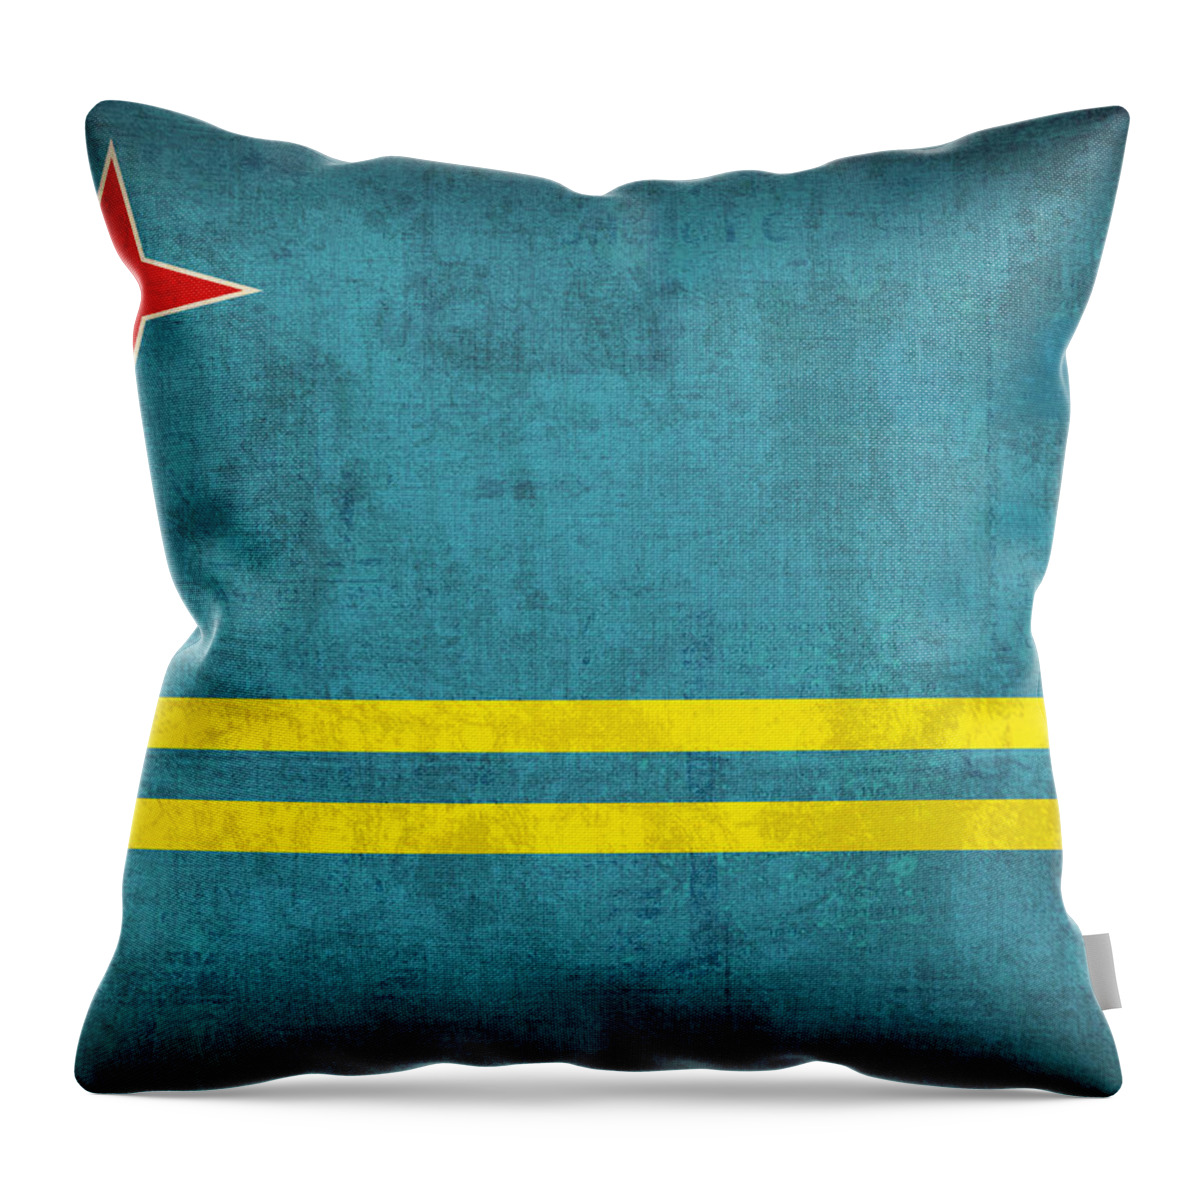 Aruba Throw Pillow featuring the mixed media Aruba Flag Vintage Distressed Finish by Design Turnpike